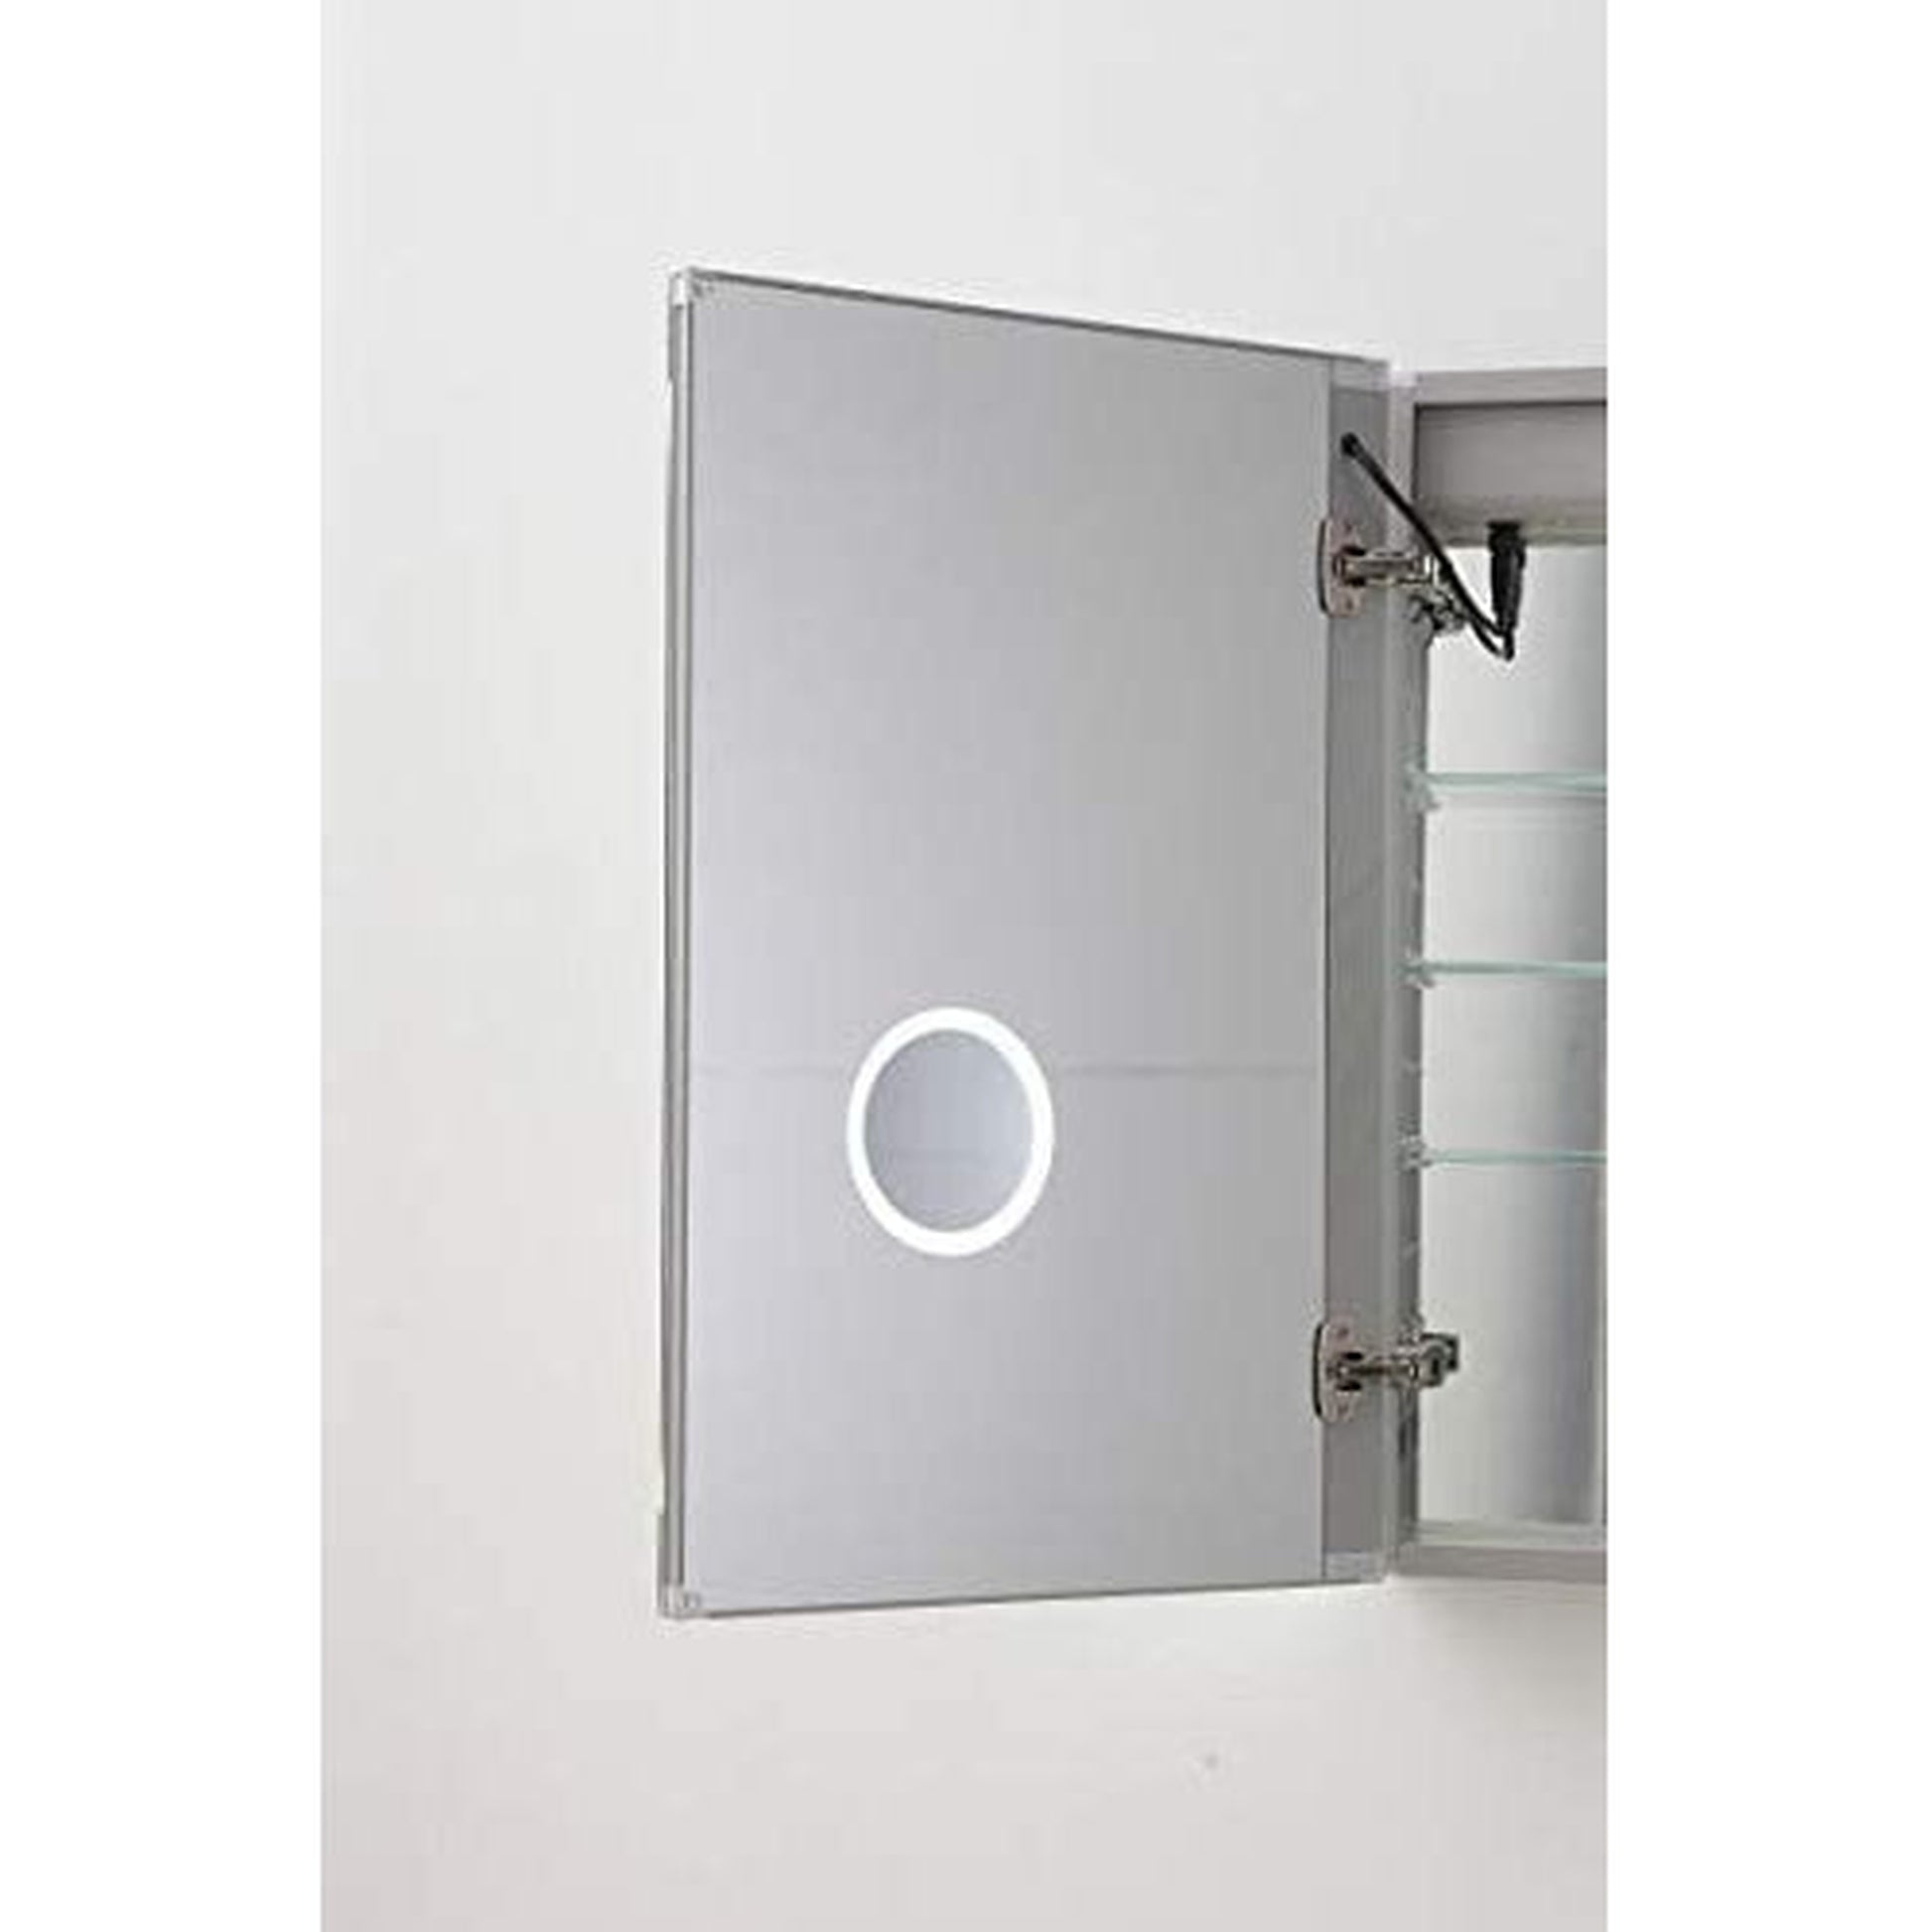 Aquadom Signature Royale Bi-View 30" x 30" Square Medicine Cabinet With Lighting, Defogger, Integrated LED 3X Magnifying Mirror And Electrical Outlet with USB